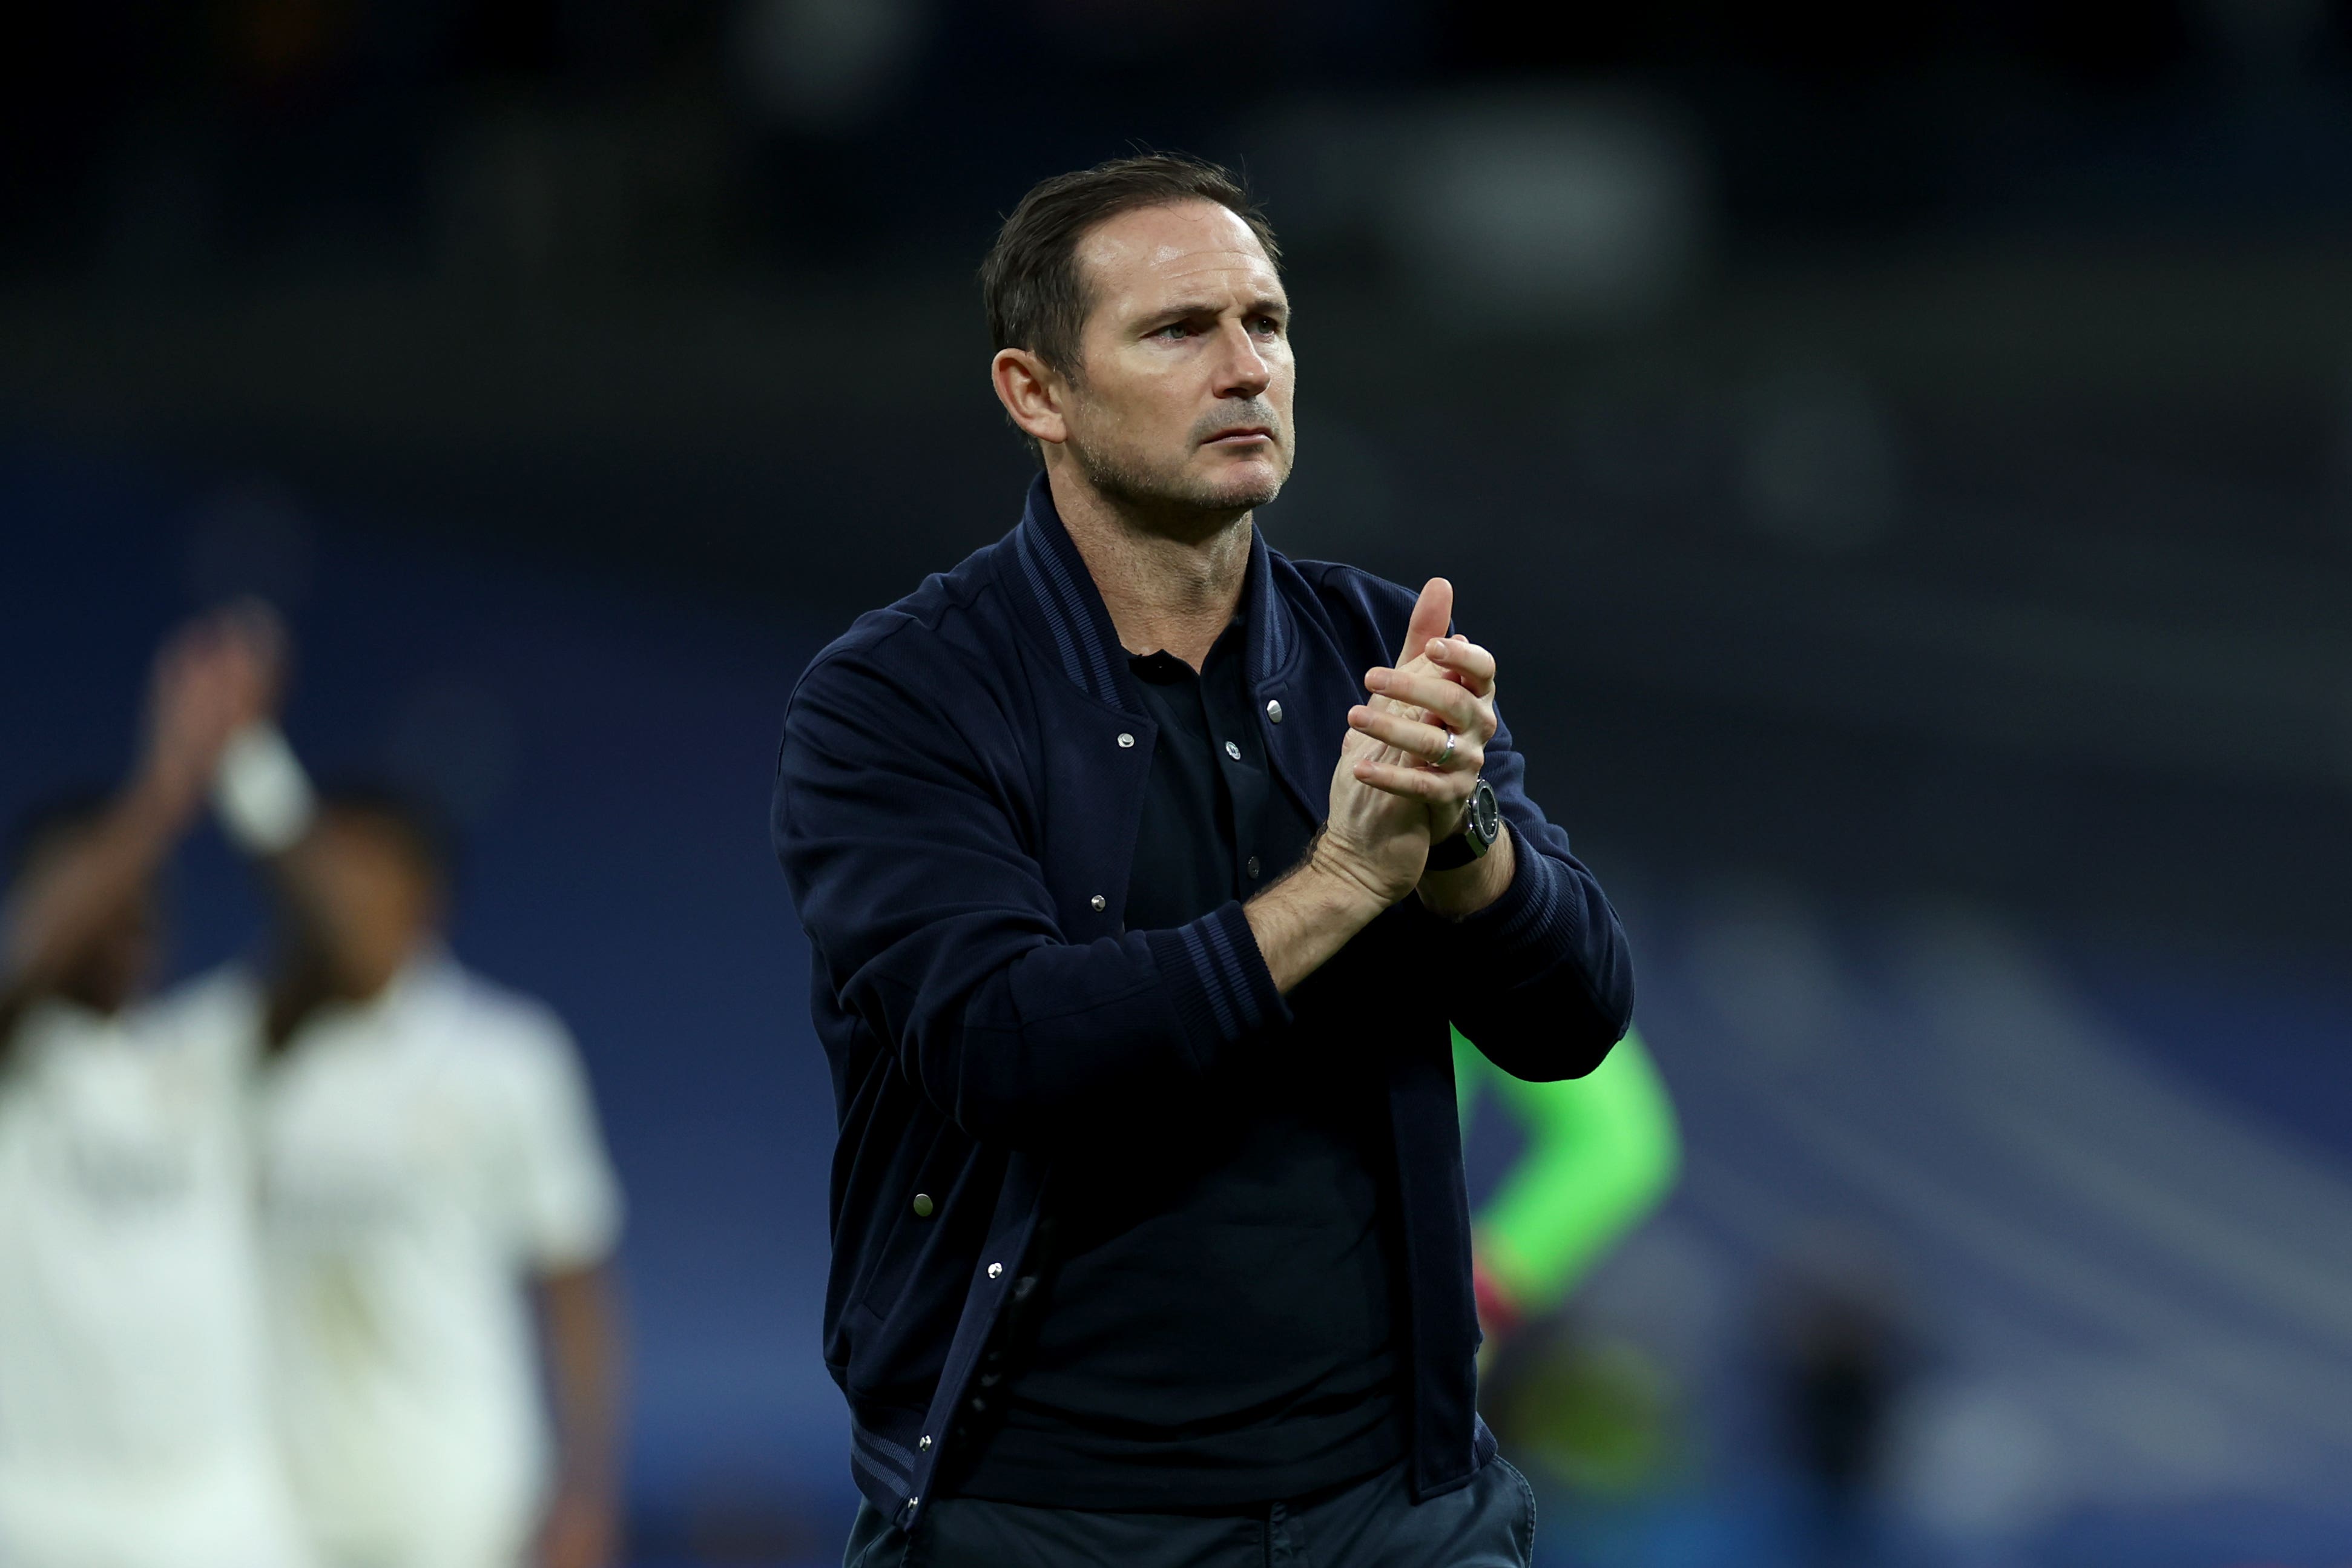 Frank Lampard defends Chelsea’s approach in Real Madrid defeat